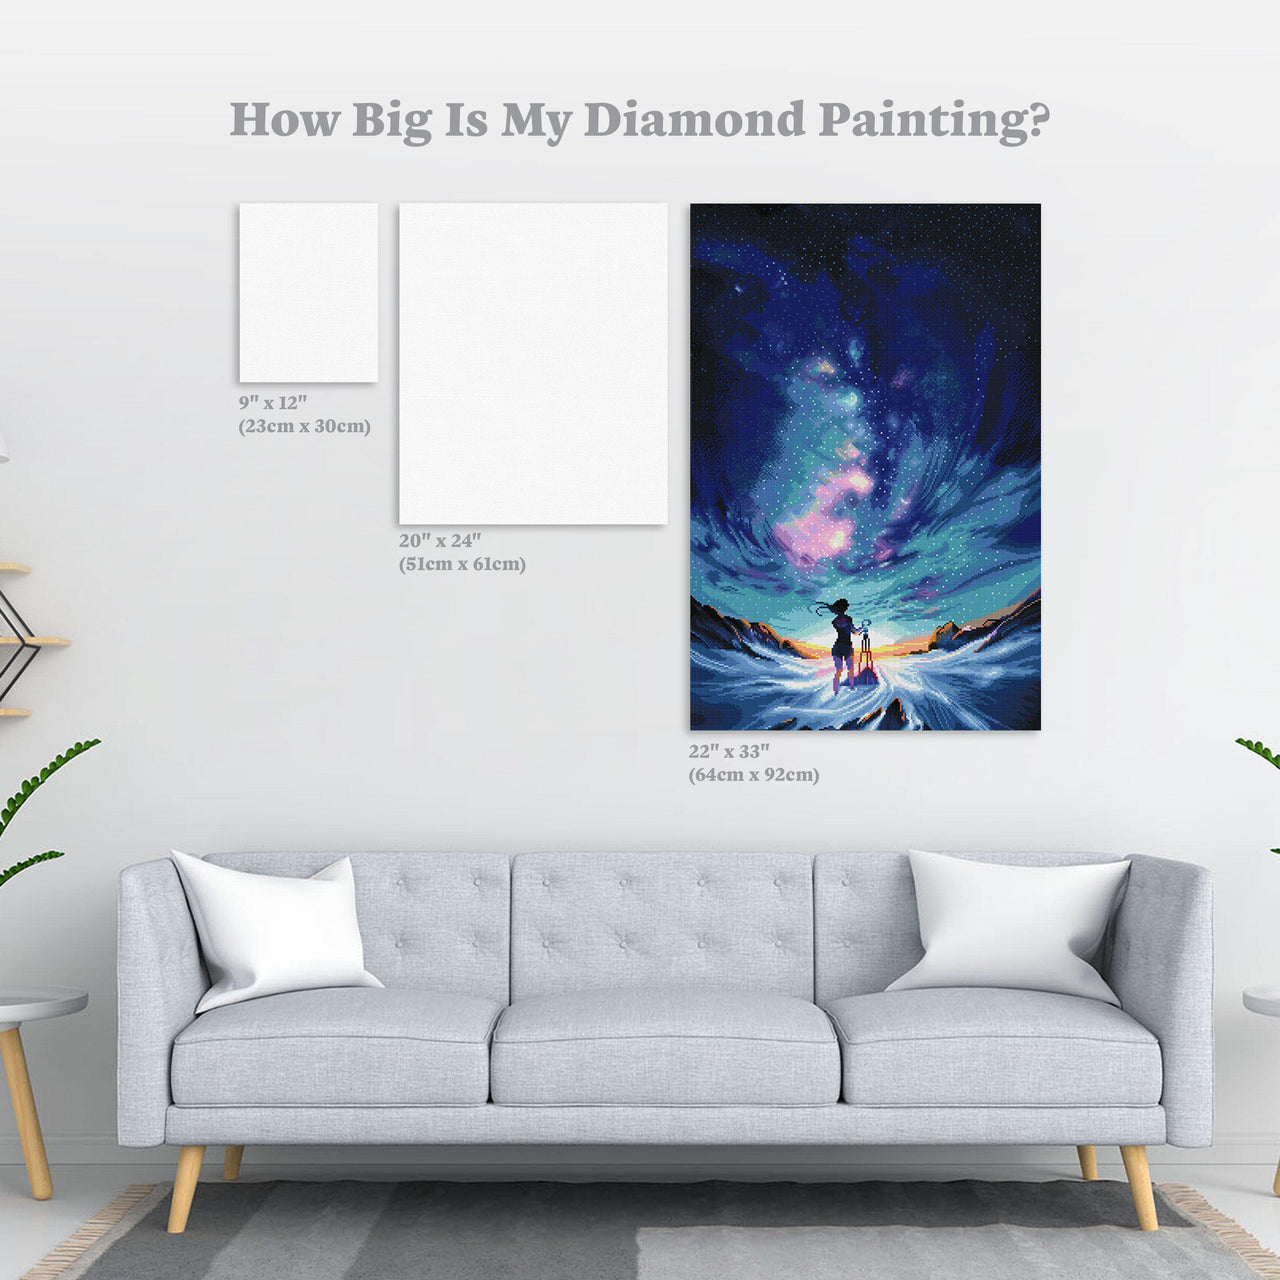 Diamond Painting Capture the Sky 22" x 33″ (64cm x 92cm) / Square with 50 Colors including 4 ABs / 73,372